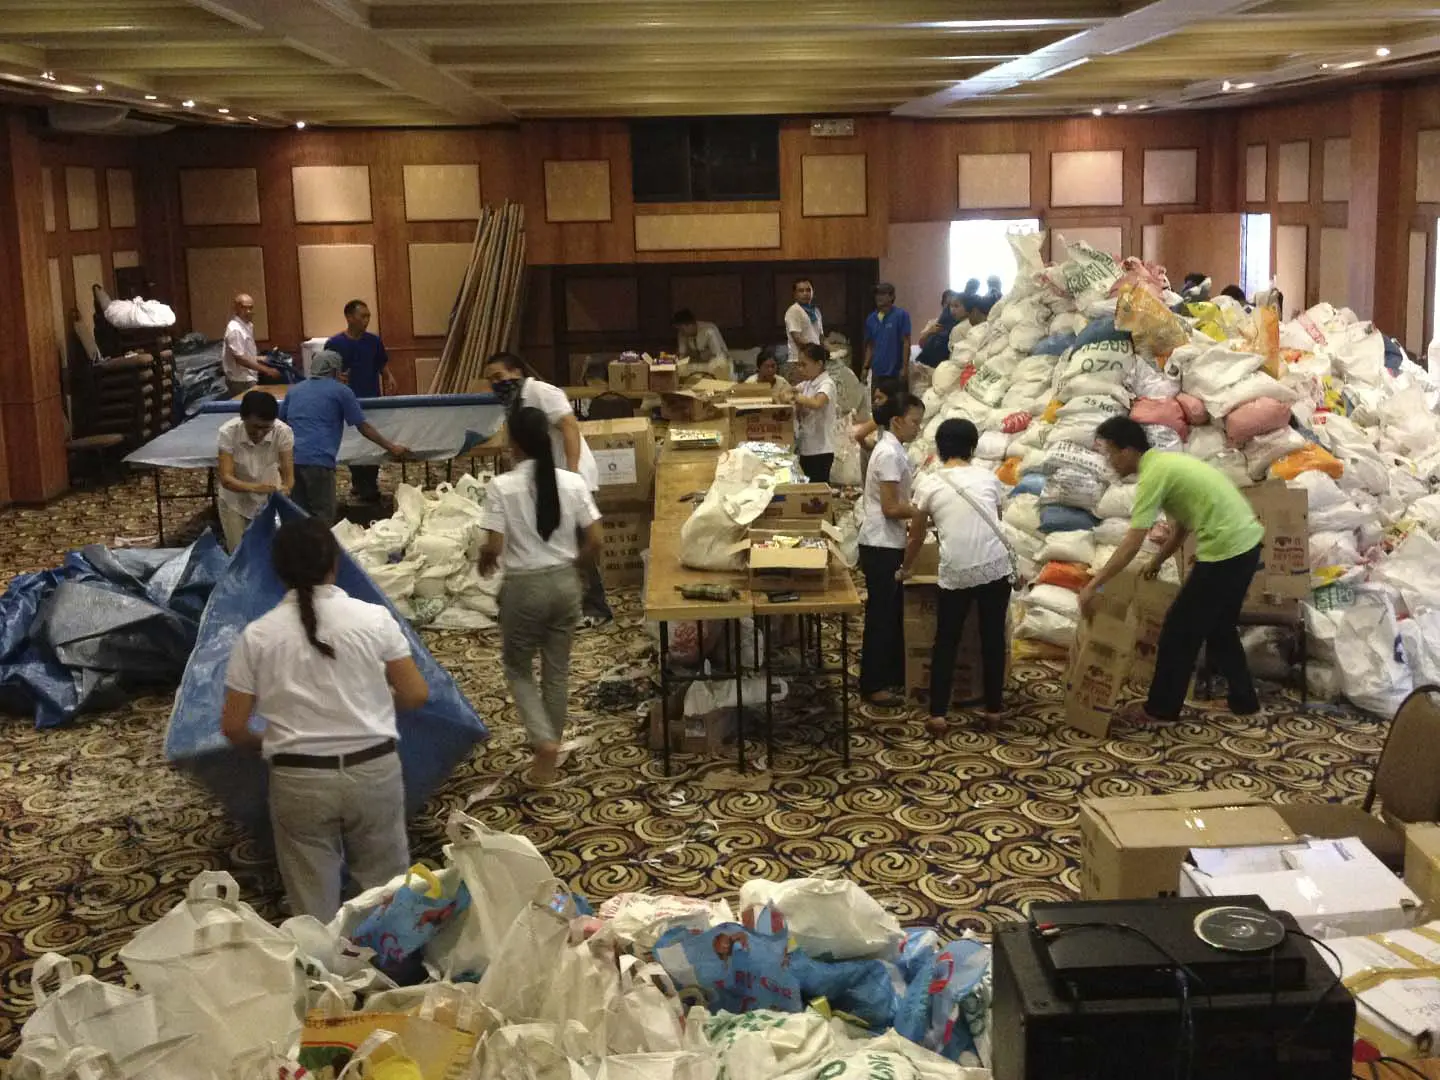 10 Ways You Can Help during a Natural Disasters in the Philippines: volunteer your time and donate resources